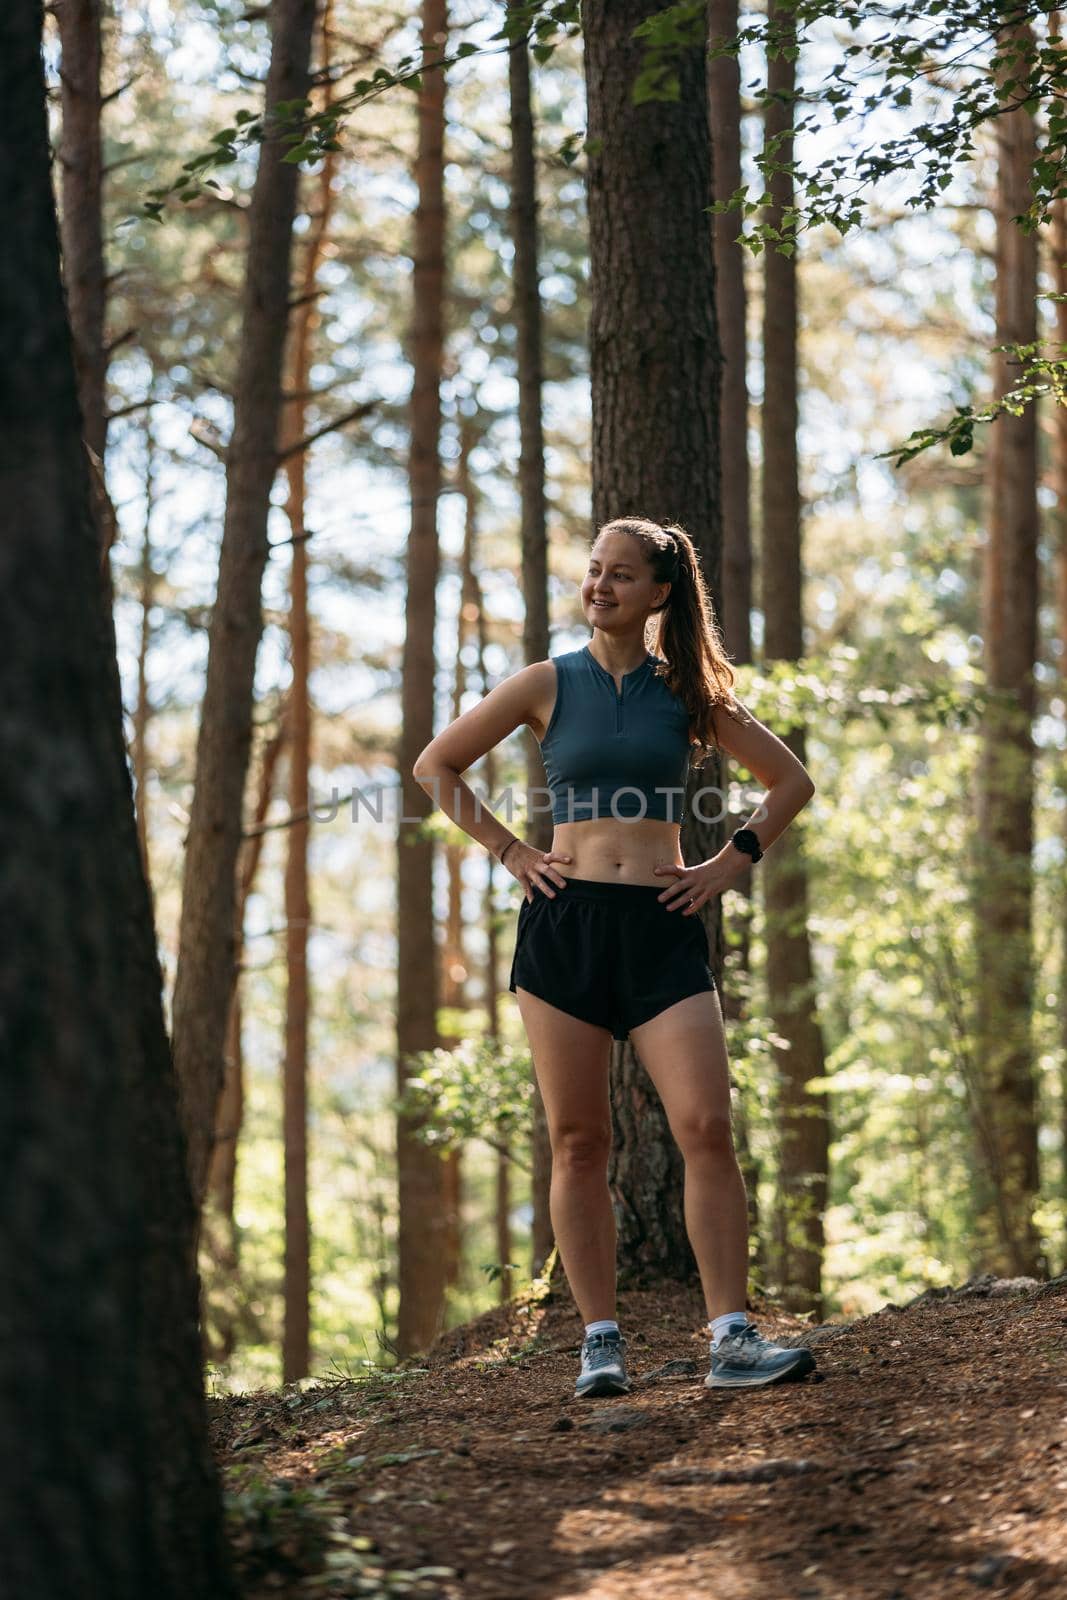 Happy girl practice trial running in the morning forest. Concept of sports and fitness relaxation in nature by apavlin